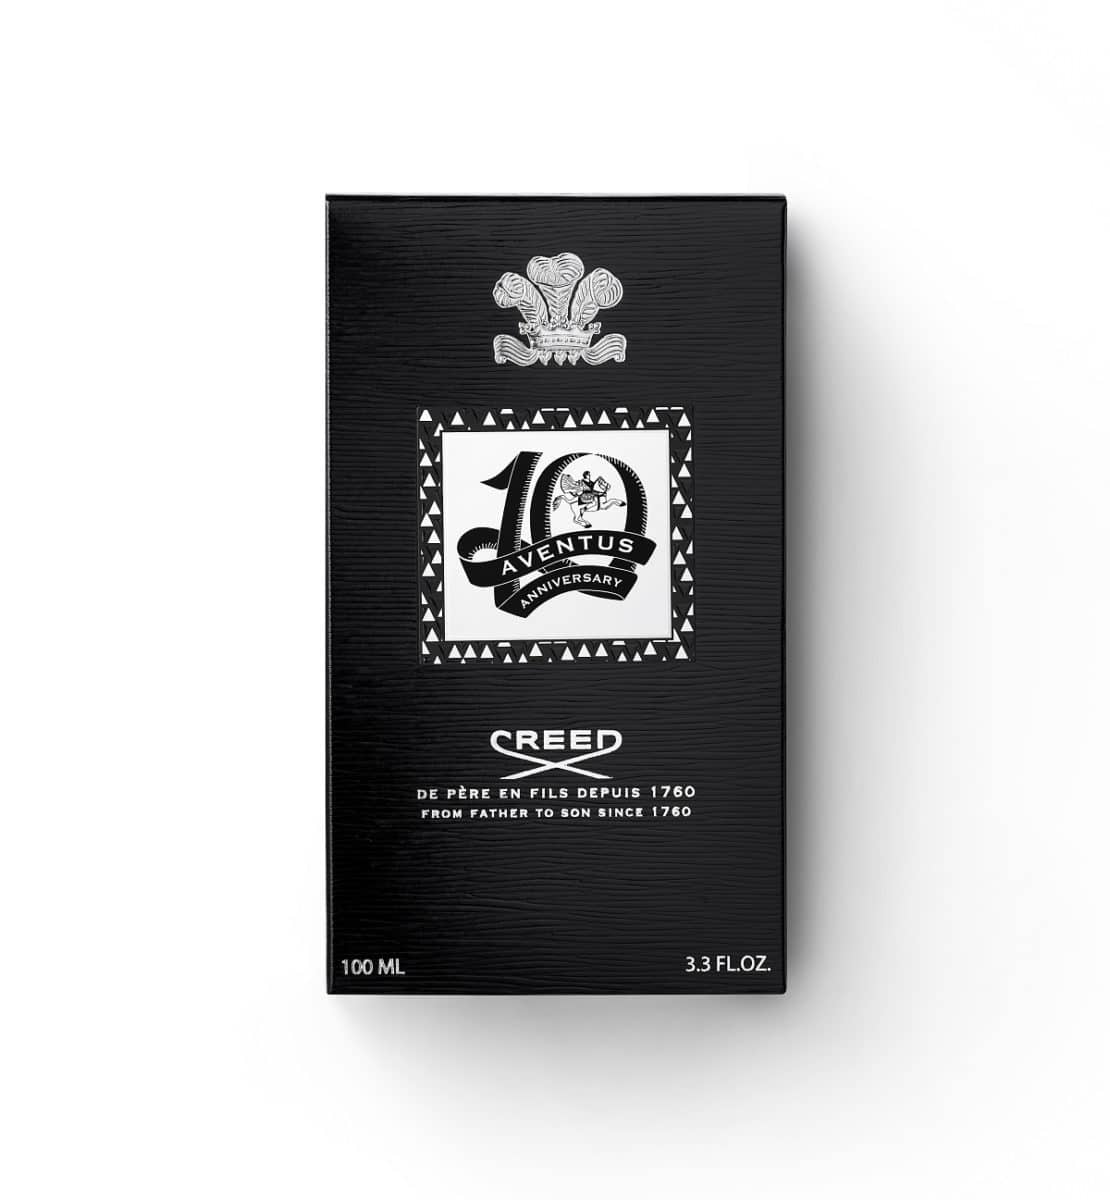 Creed Launches Aventus 10 Year Anniversary Limited-Edition Bottling